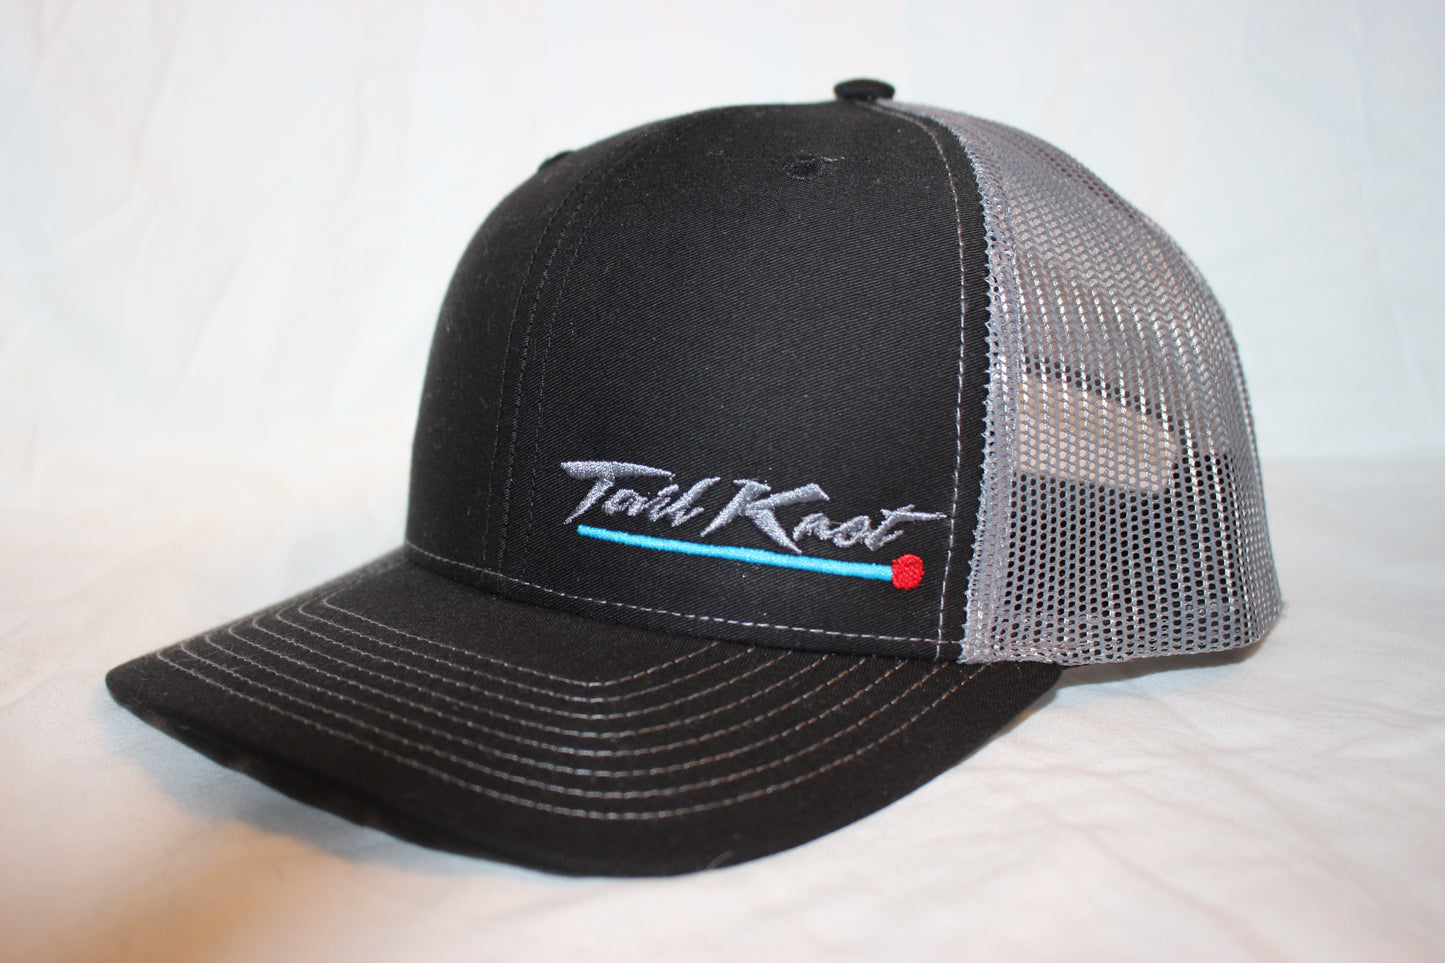 Tail Knot Black and Grey Snapback